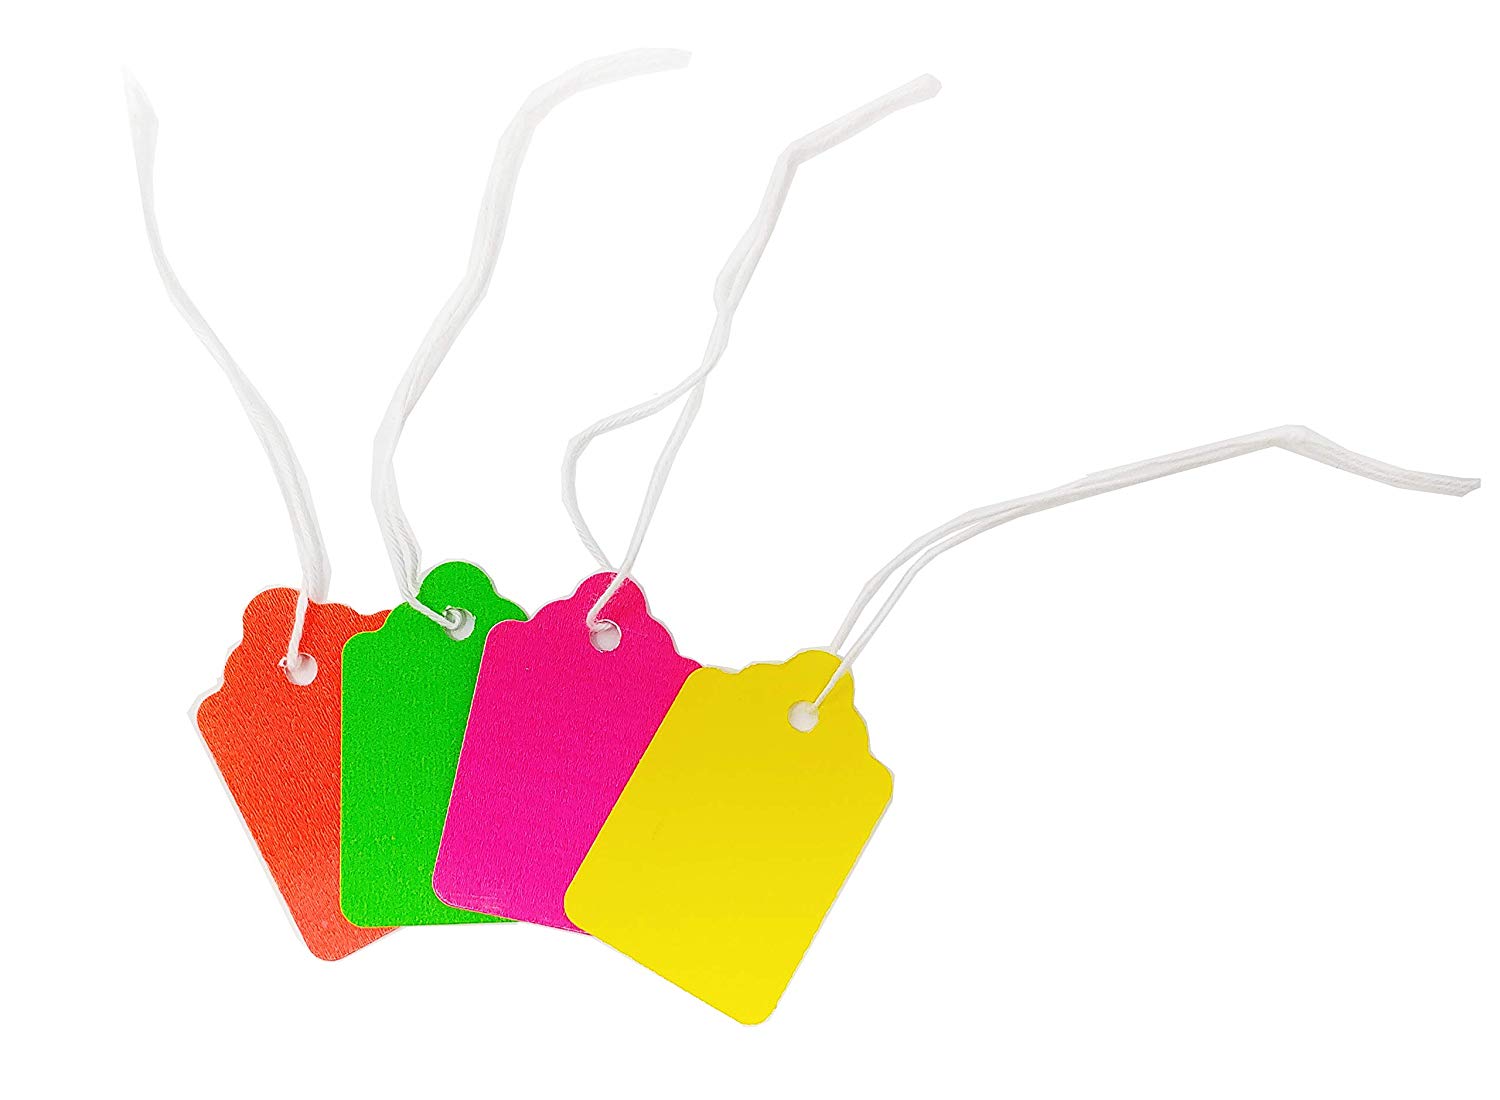 Fluorescent Neon Blank Strung Merchandise Pricing Tags with String, 5 Tags,  1.1 W x 1.75 H, 100 Pack